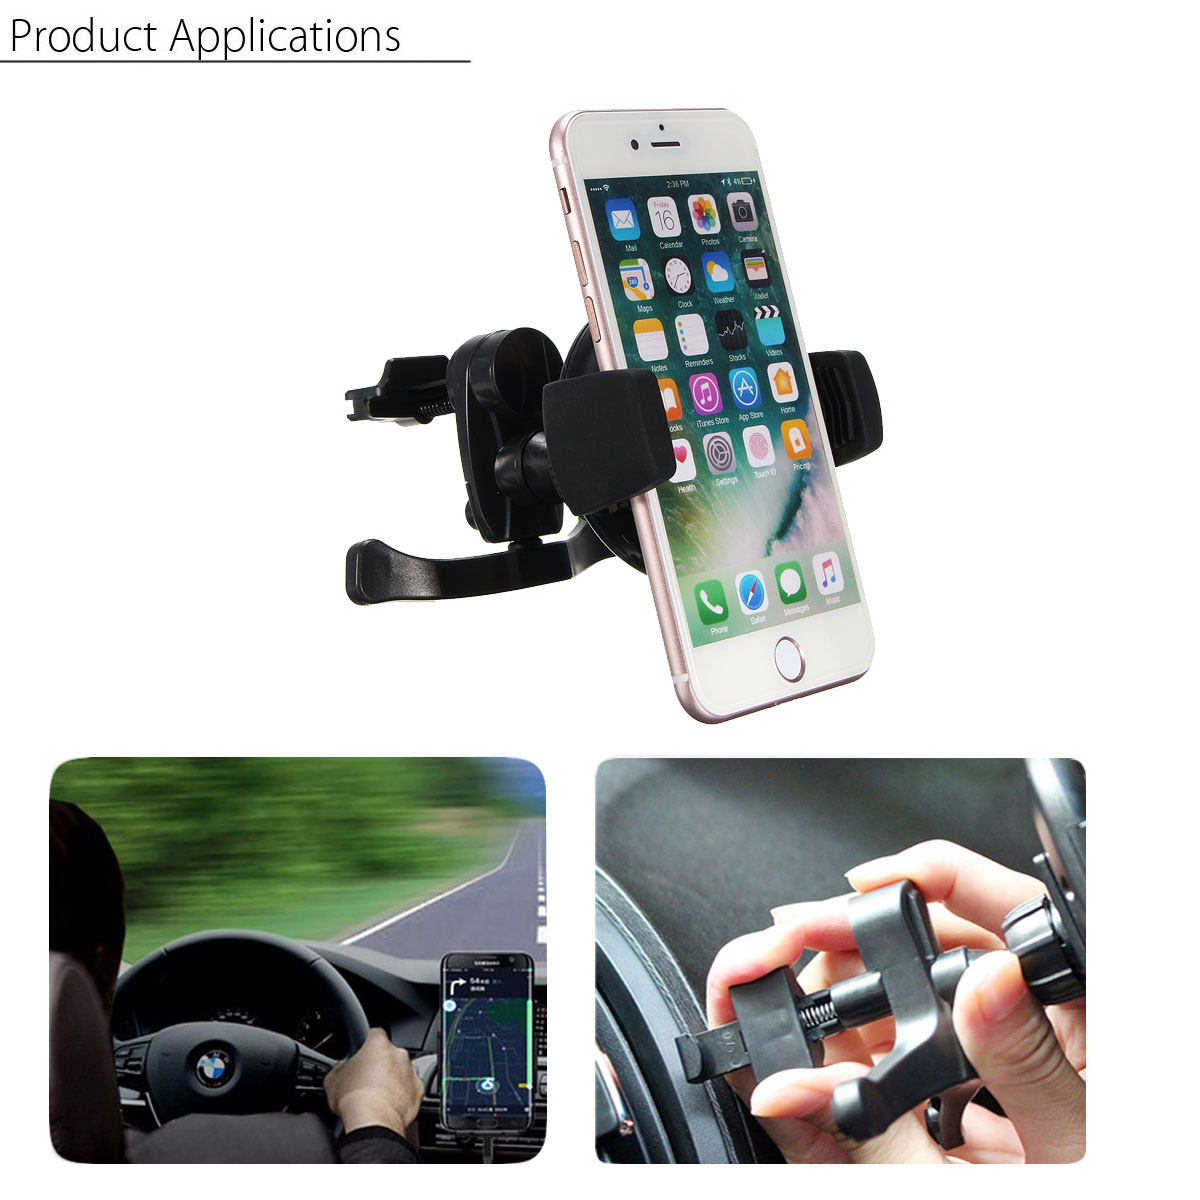 Qi-Wireless-360-Degree-Rotation-Car-Air-Vent-Holder-Charger-for-Samsung-S8-Plus-S7-1176368-7